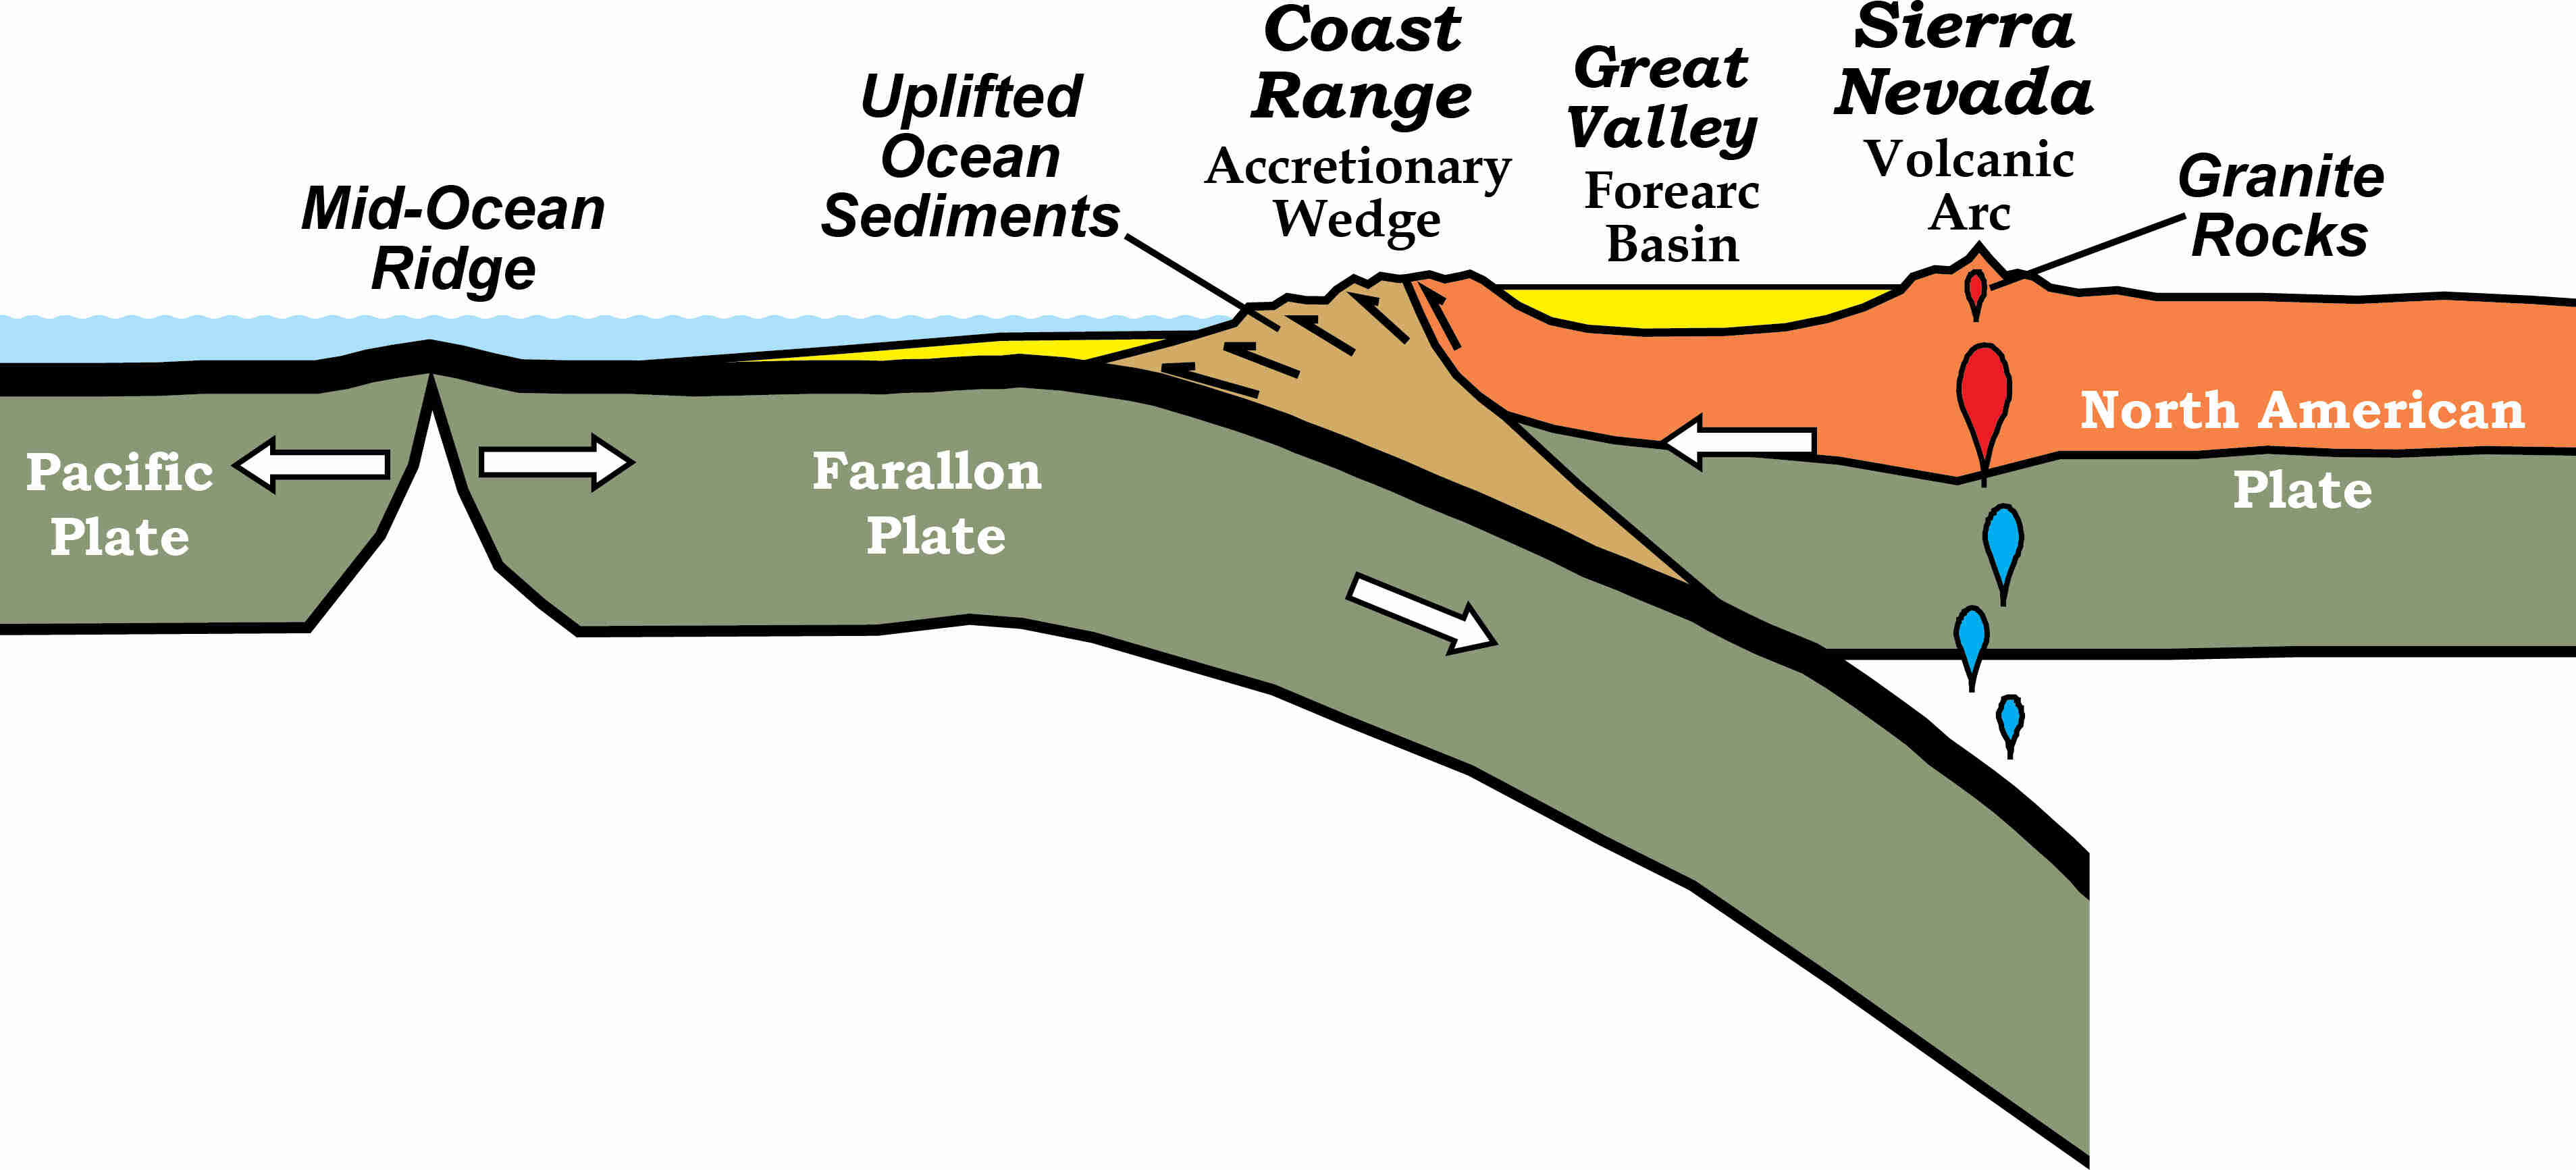 15-intriguing-facts-about-tectonic-uplift